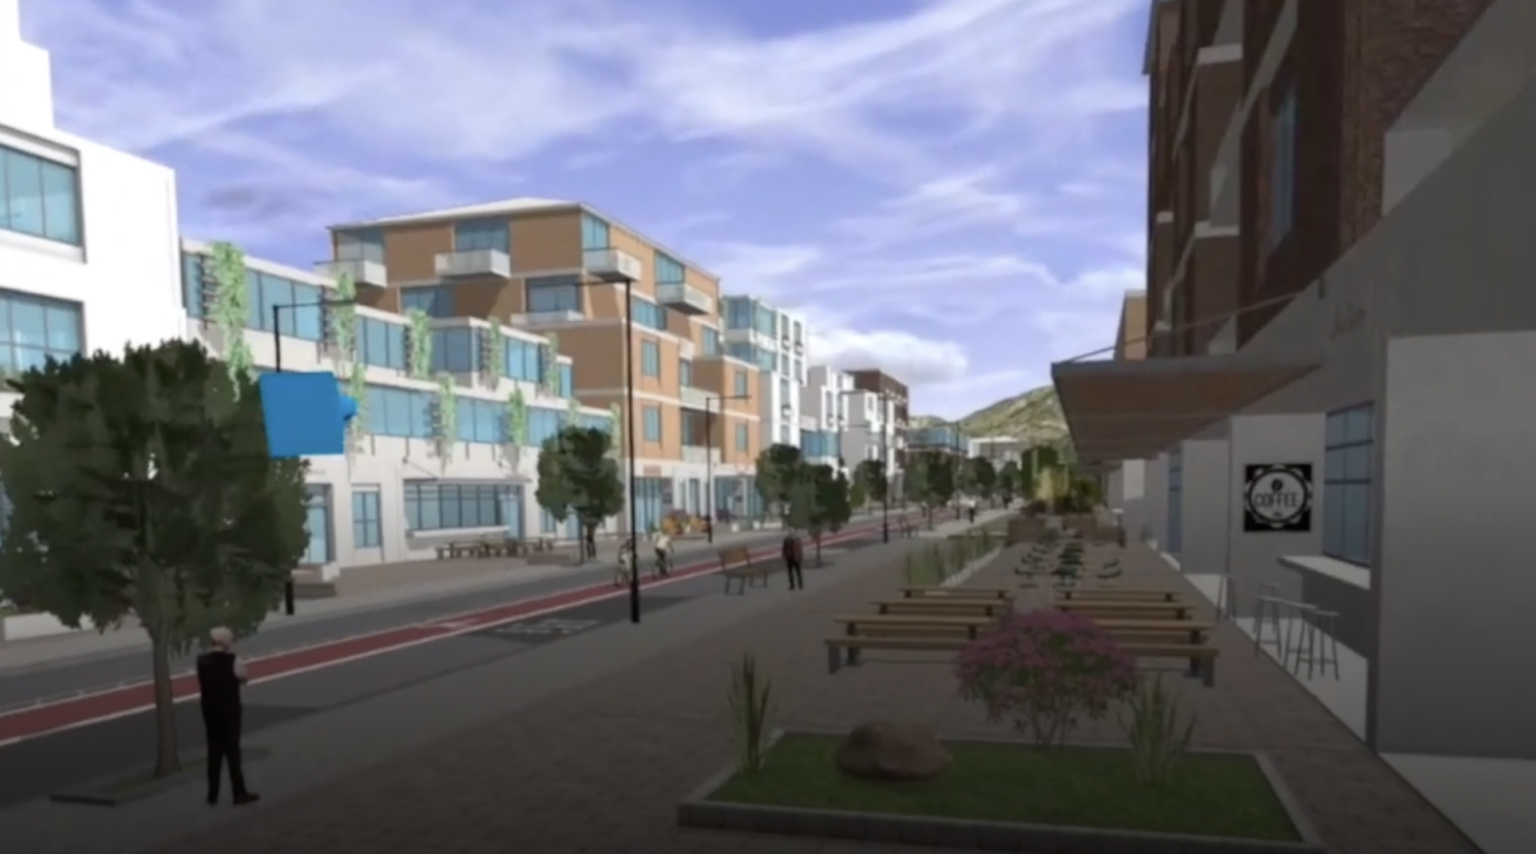 3D scene of a city block with buildings, a road, and green trees viewed through a VR headset